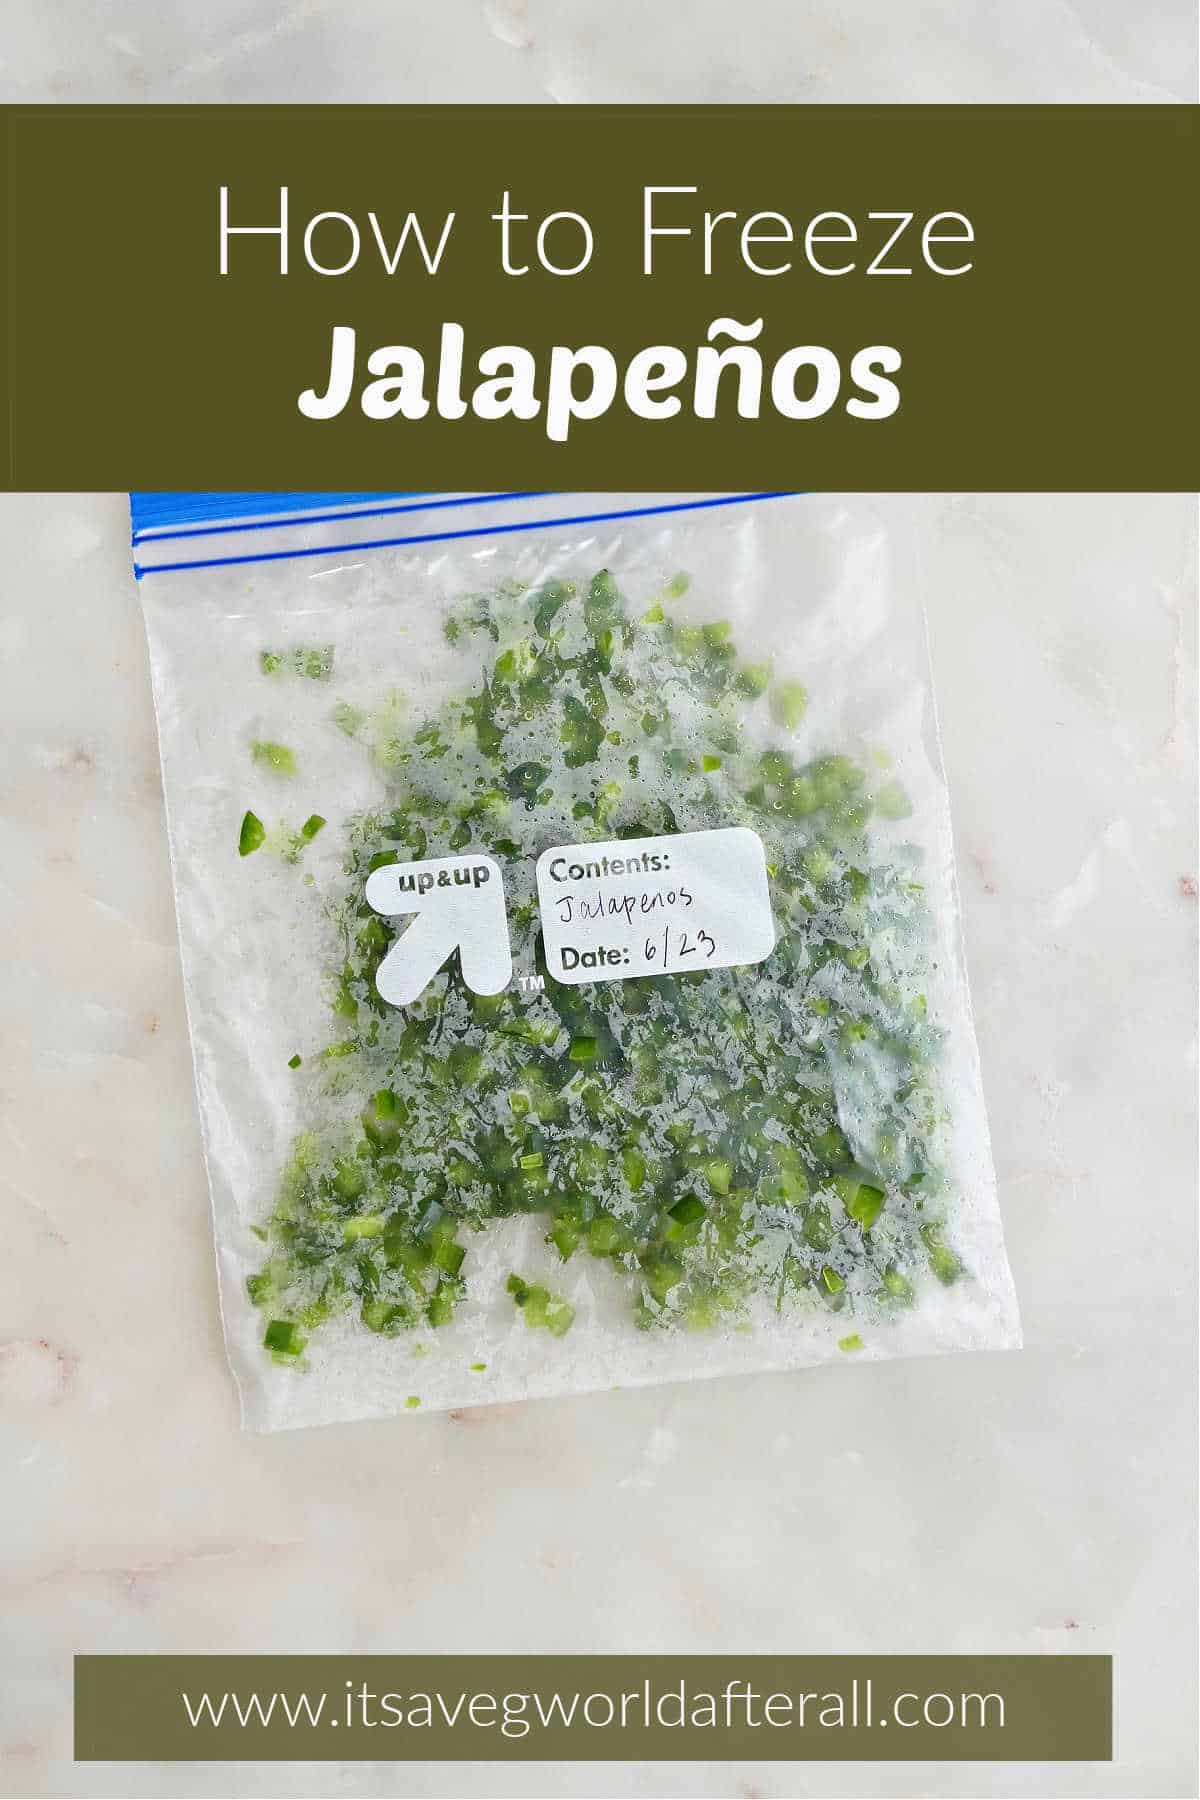 diced jalapeños in a freezer bag with text boxes for post name and website